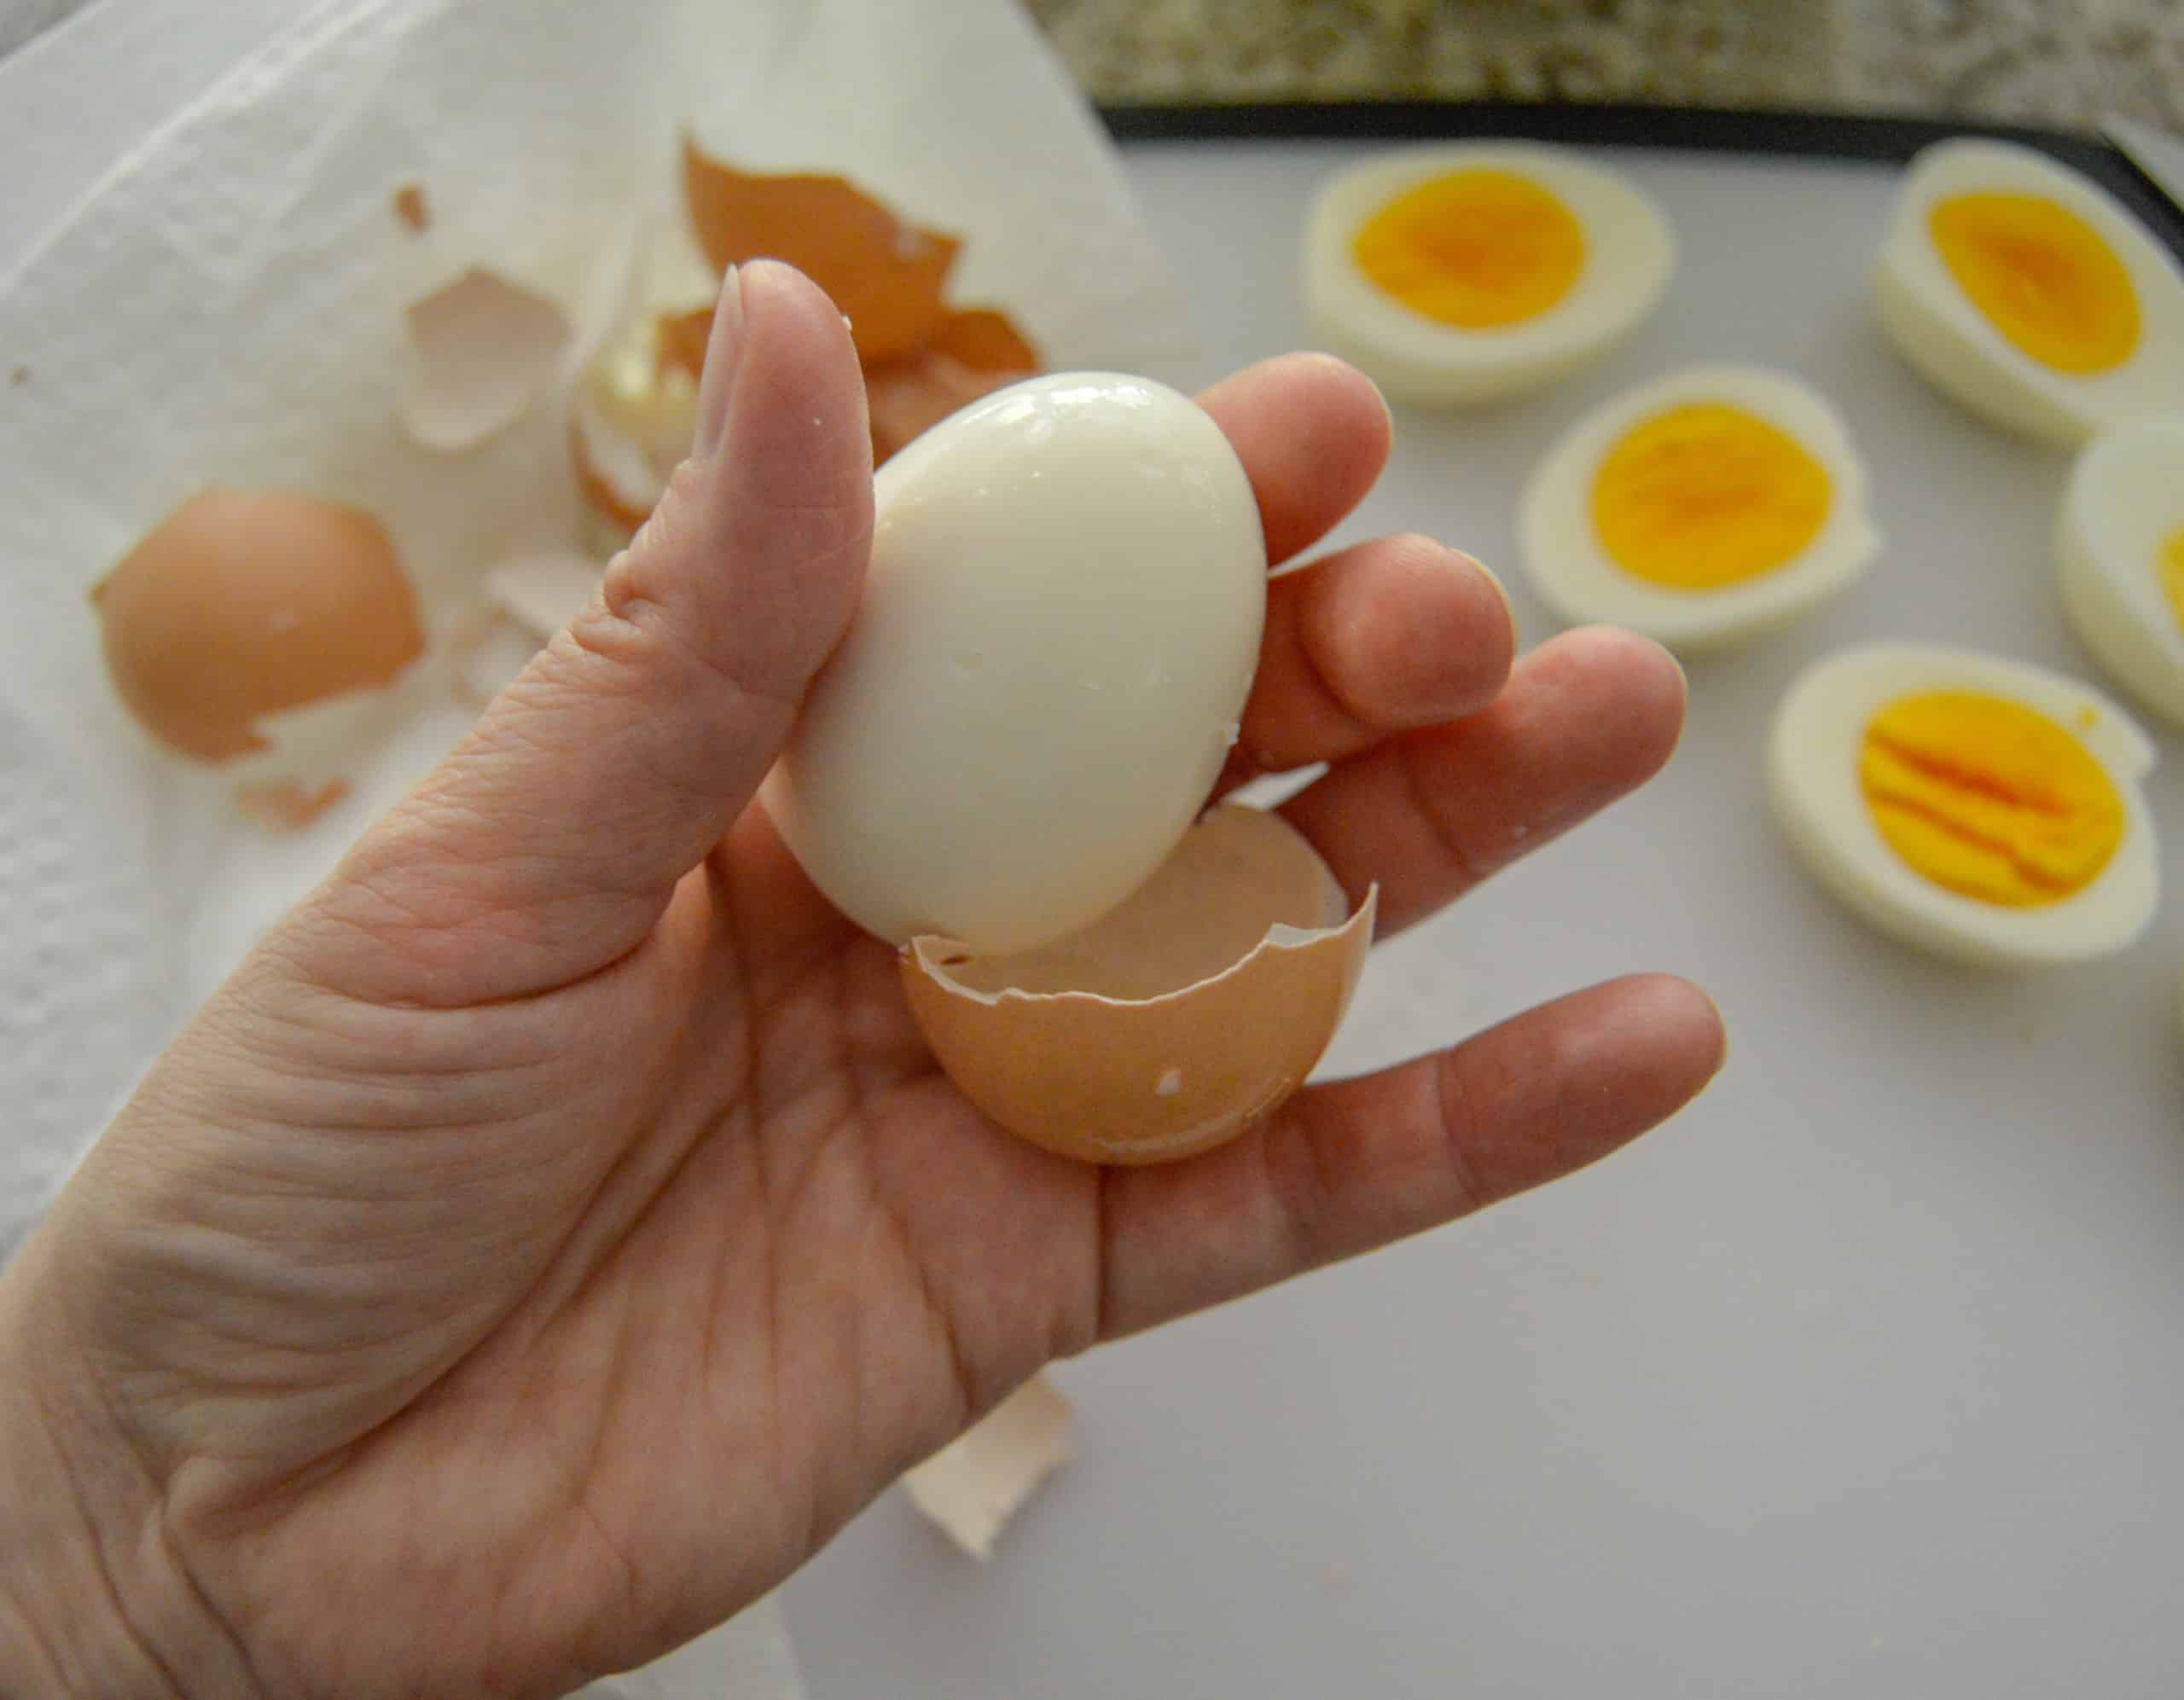 Hand holding peeled egg with hard boiled eggs cut and peeled in background